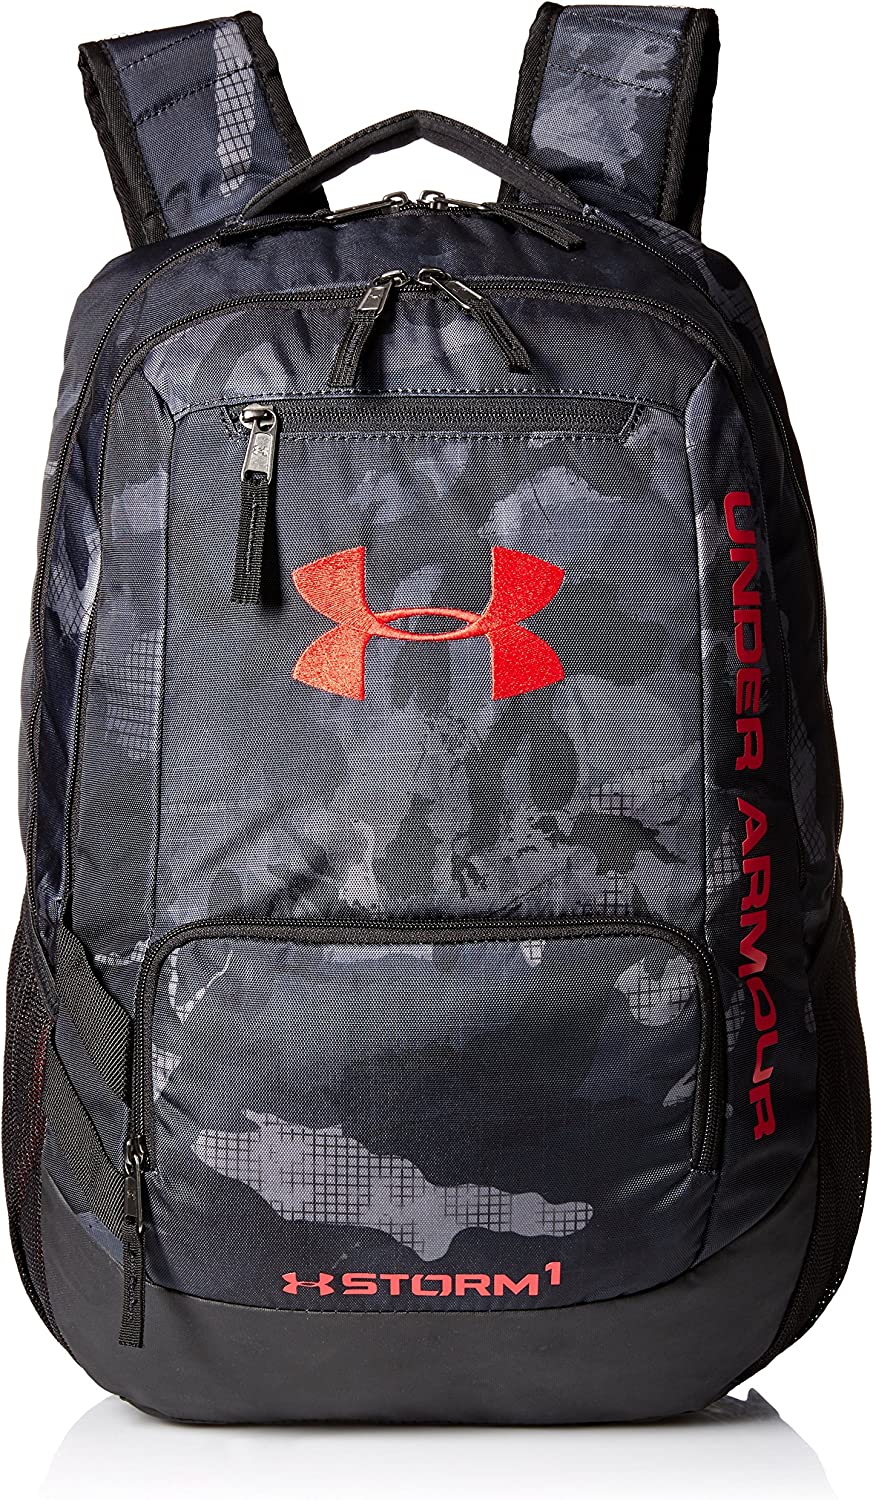 Under Armour Hustle Soft-Lined Waterproof Backpack